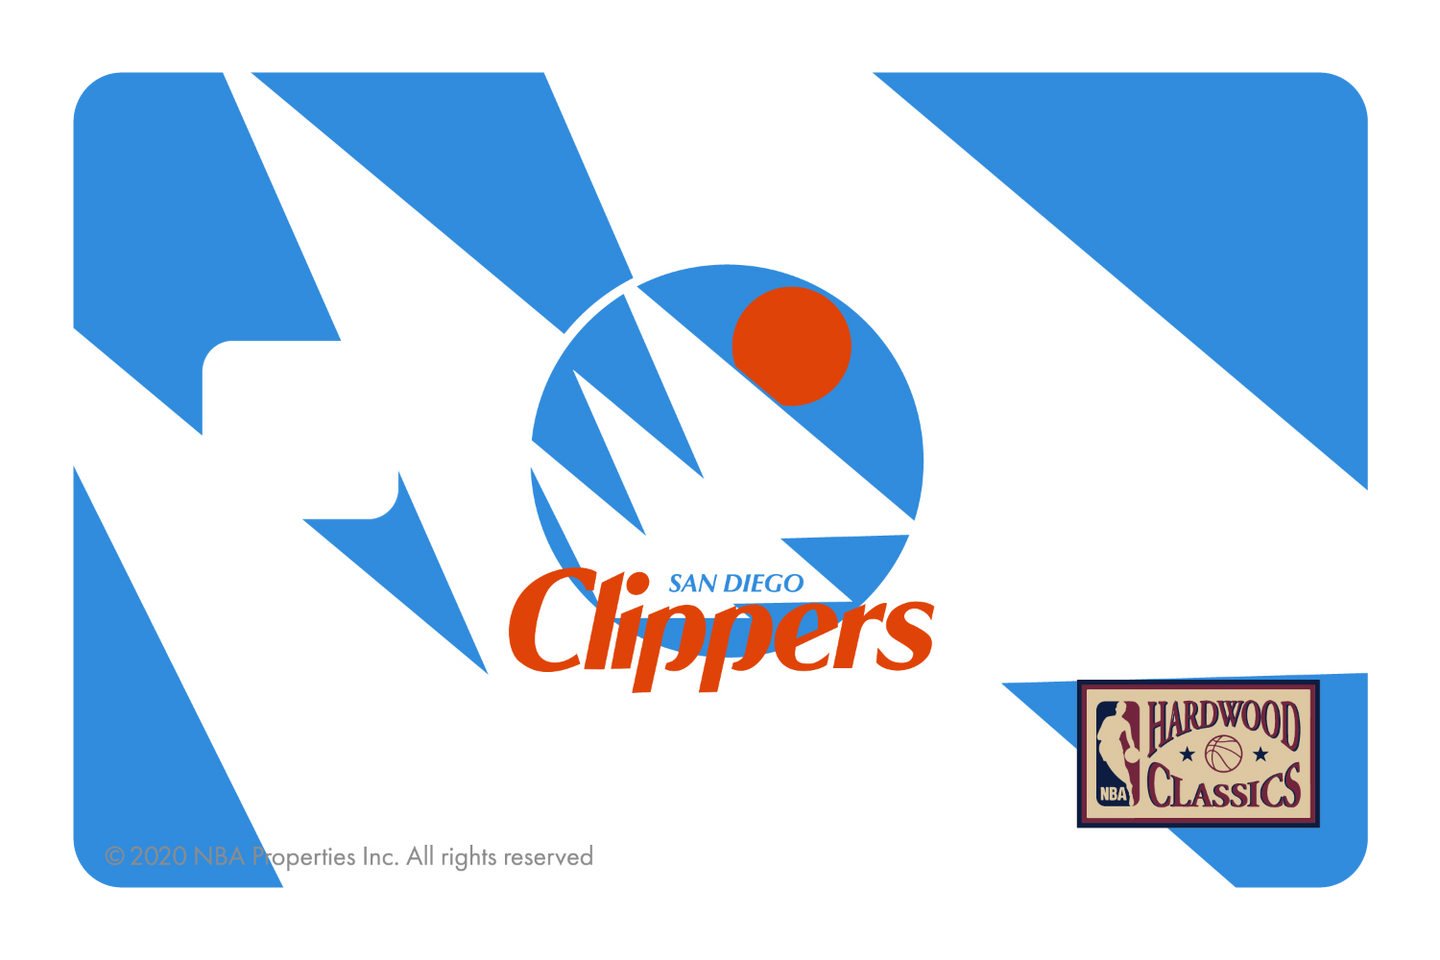 Los Angeles Clippers: Throwback Hardwood Classics